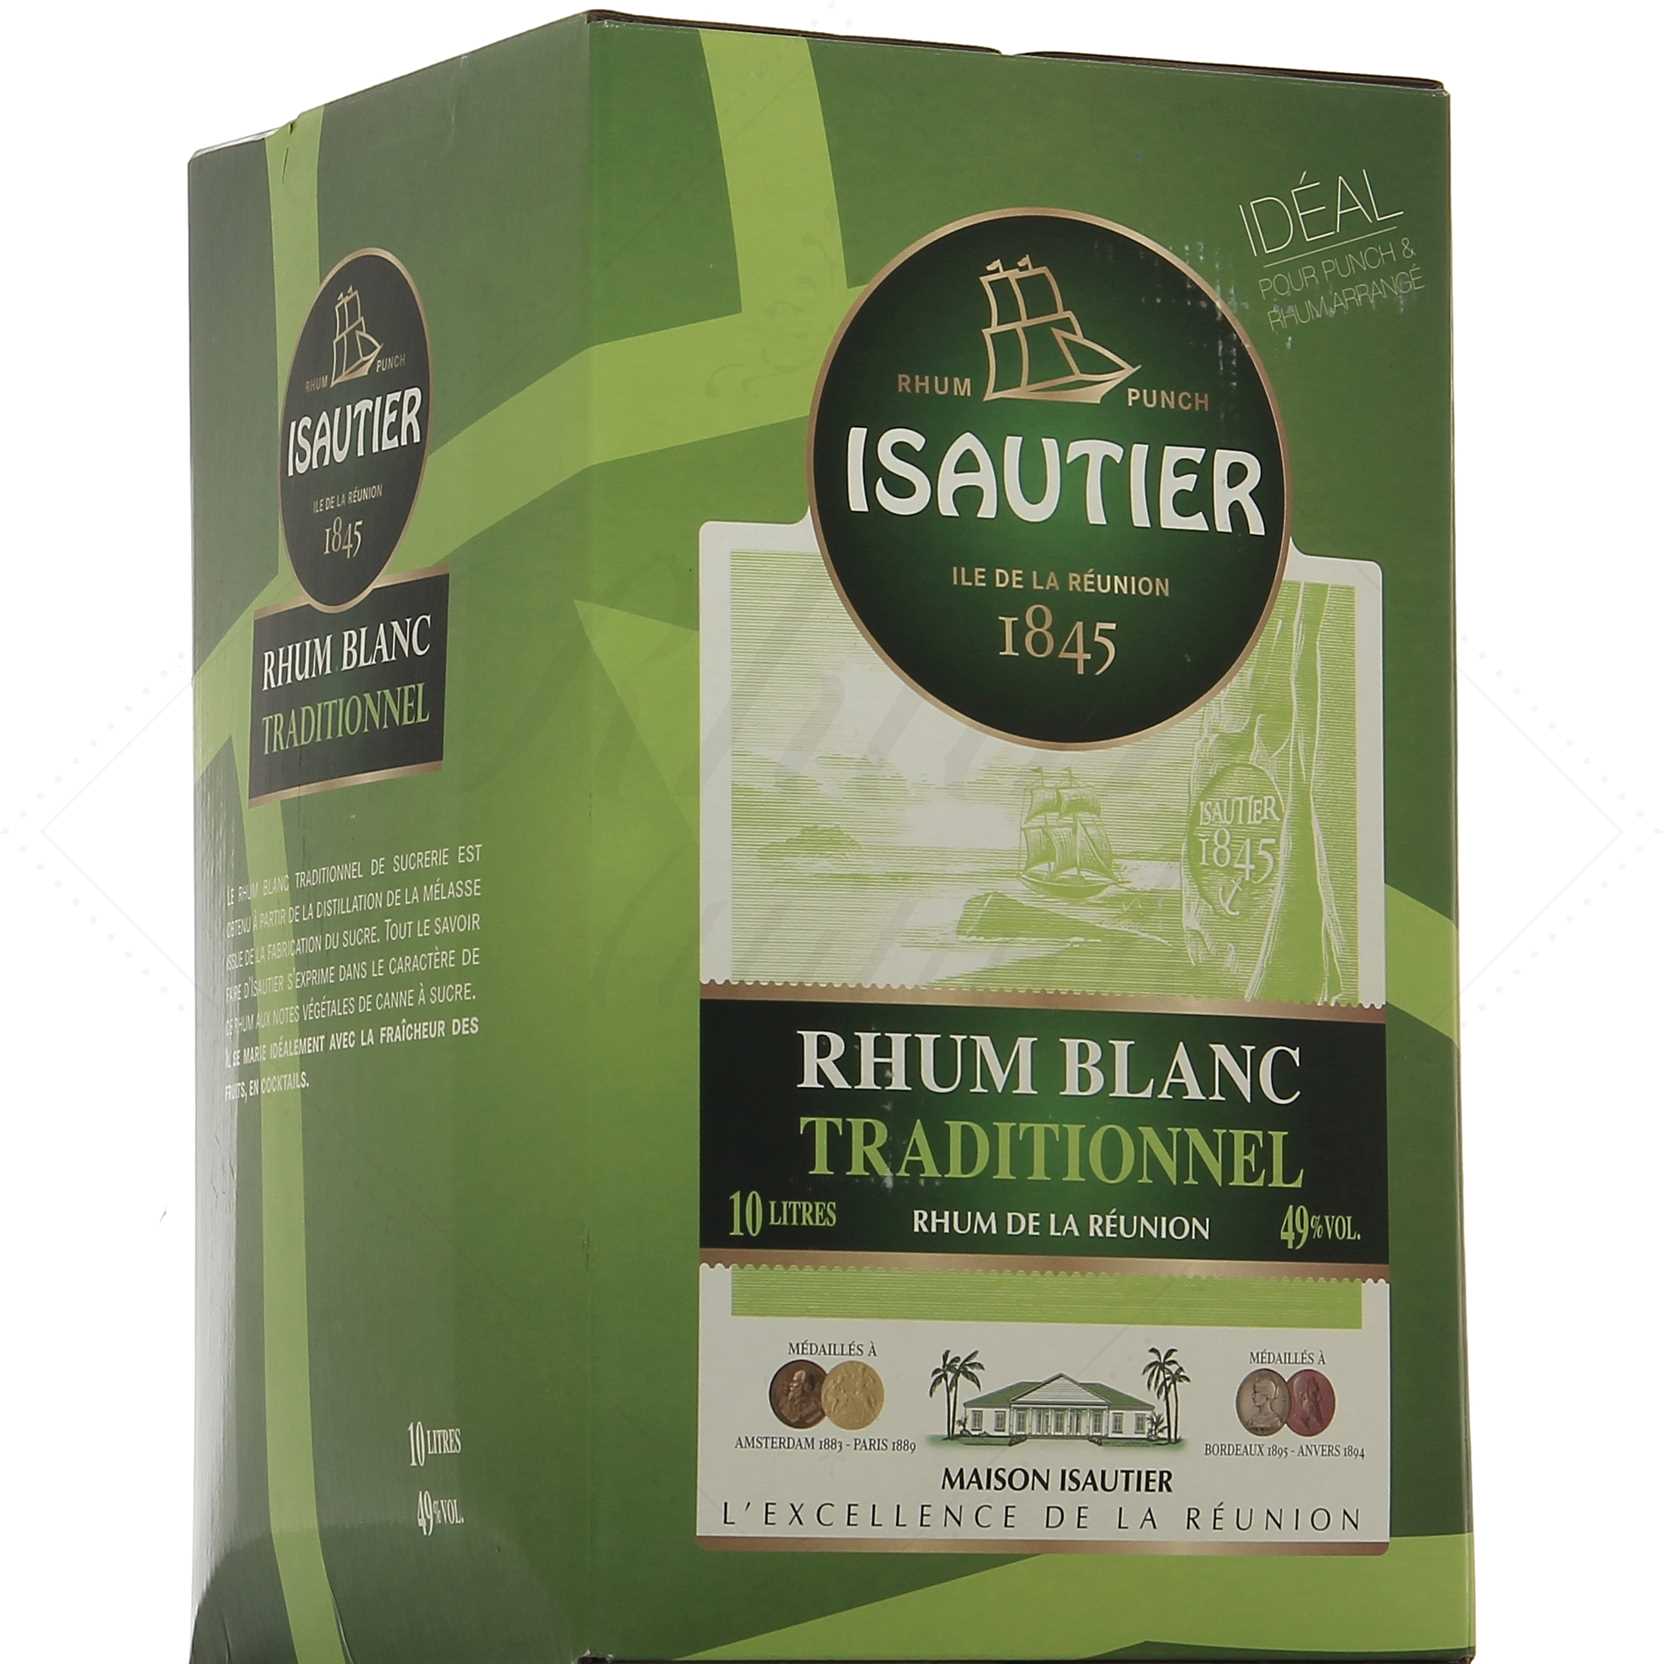 Isautier Blanc Traditionnel 49° – Cubi BIB Bag-In-Box 10 litres